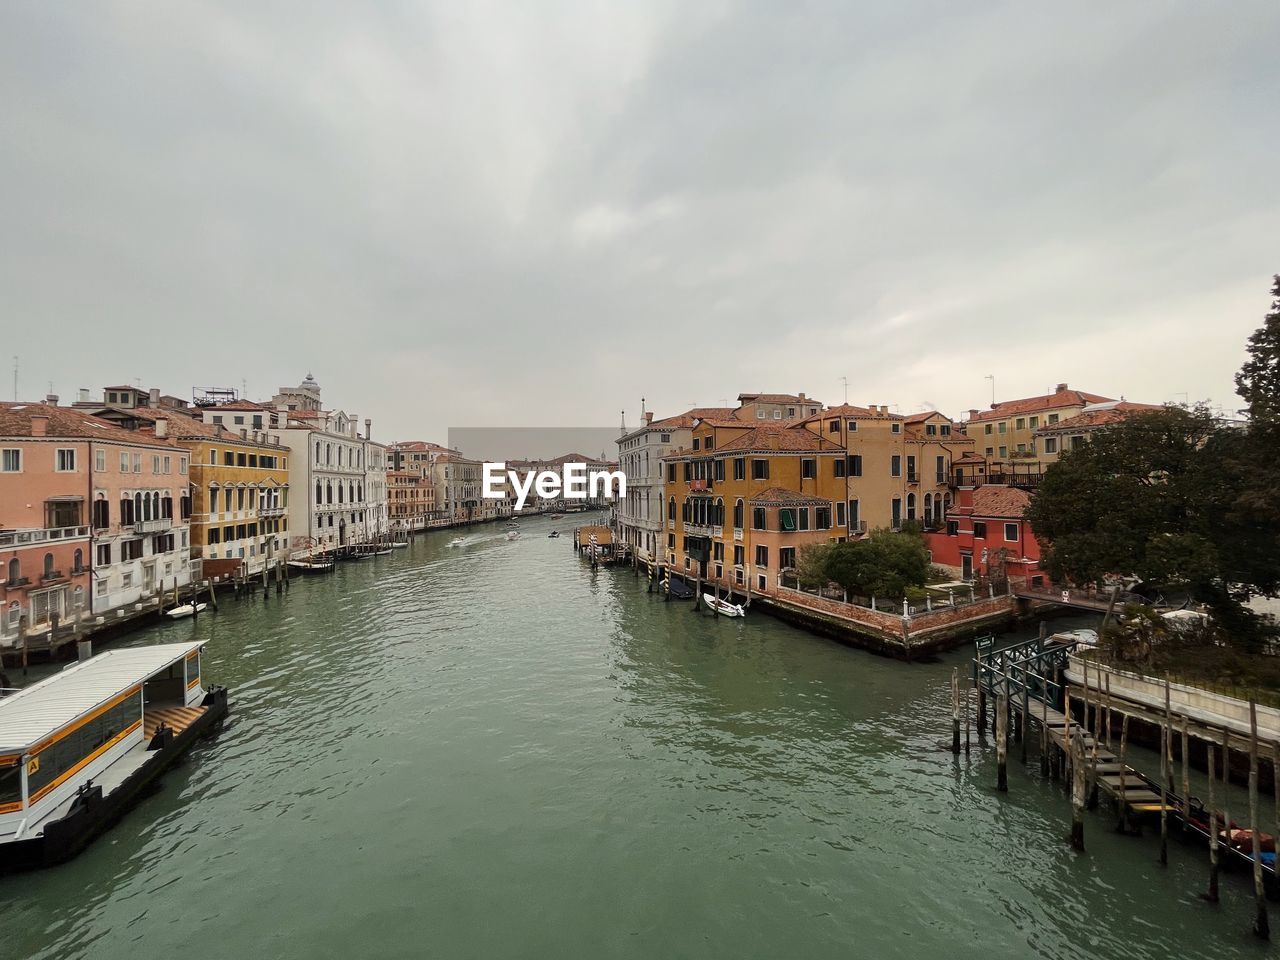 Canals and architecture of venice